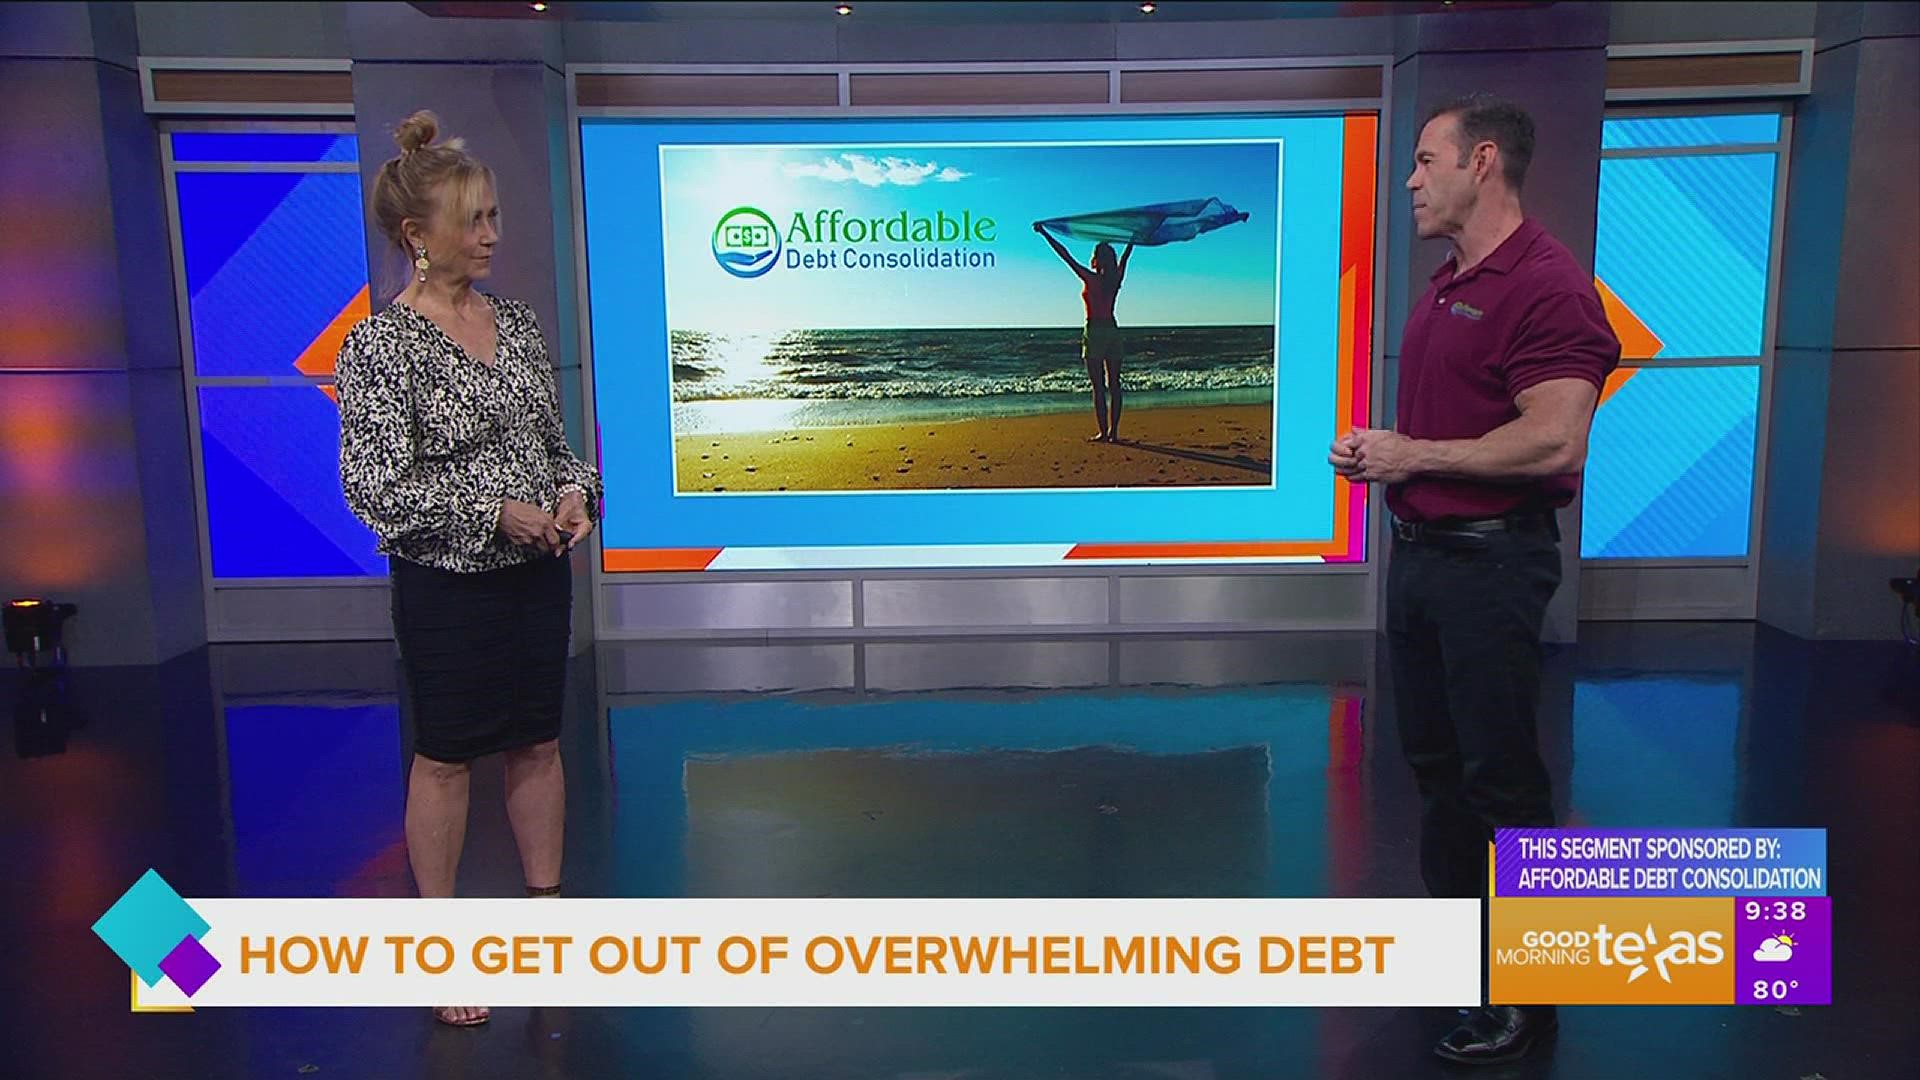 This segment is sponsored by Affordable Debt Consolidation.